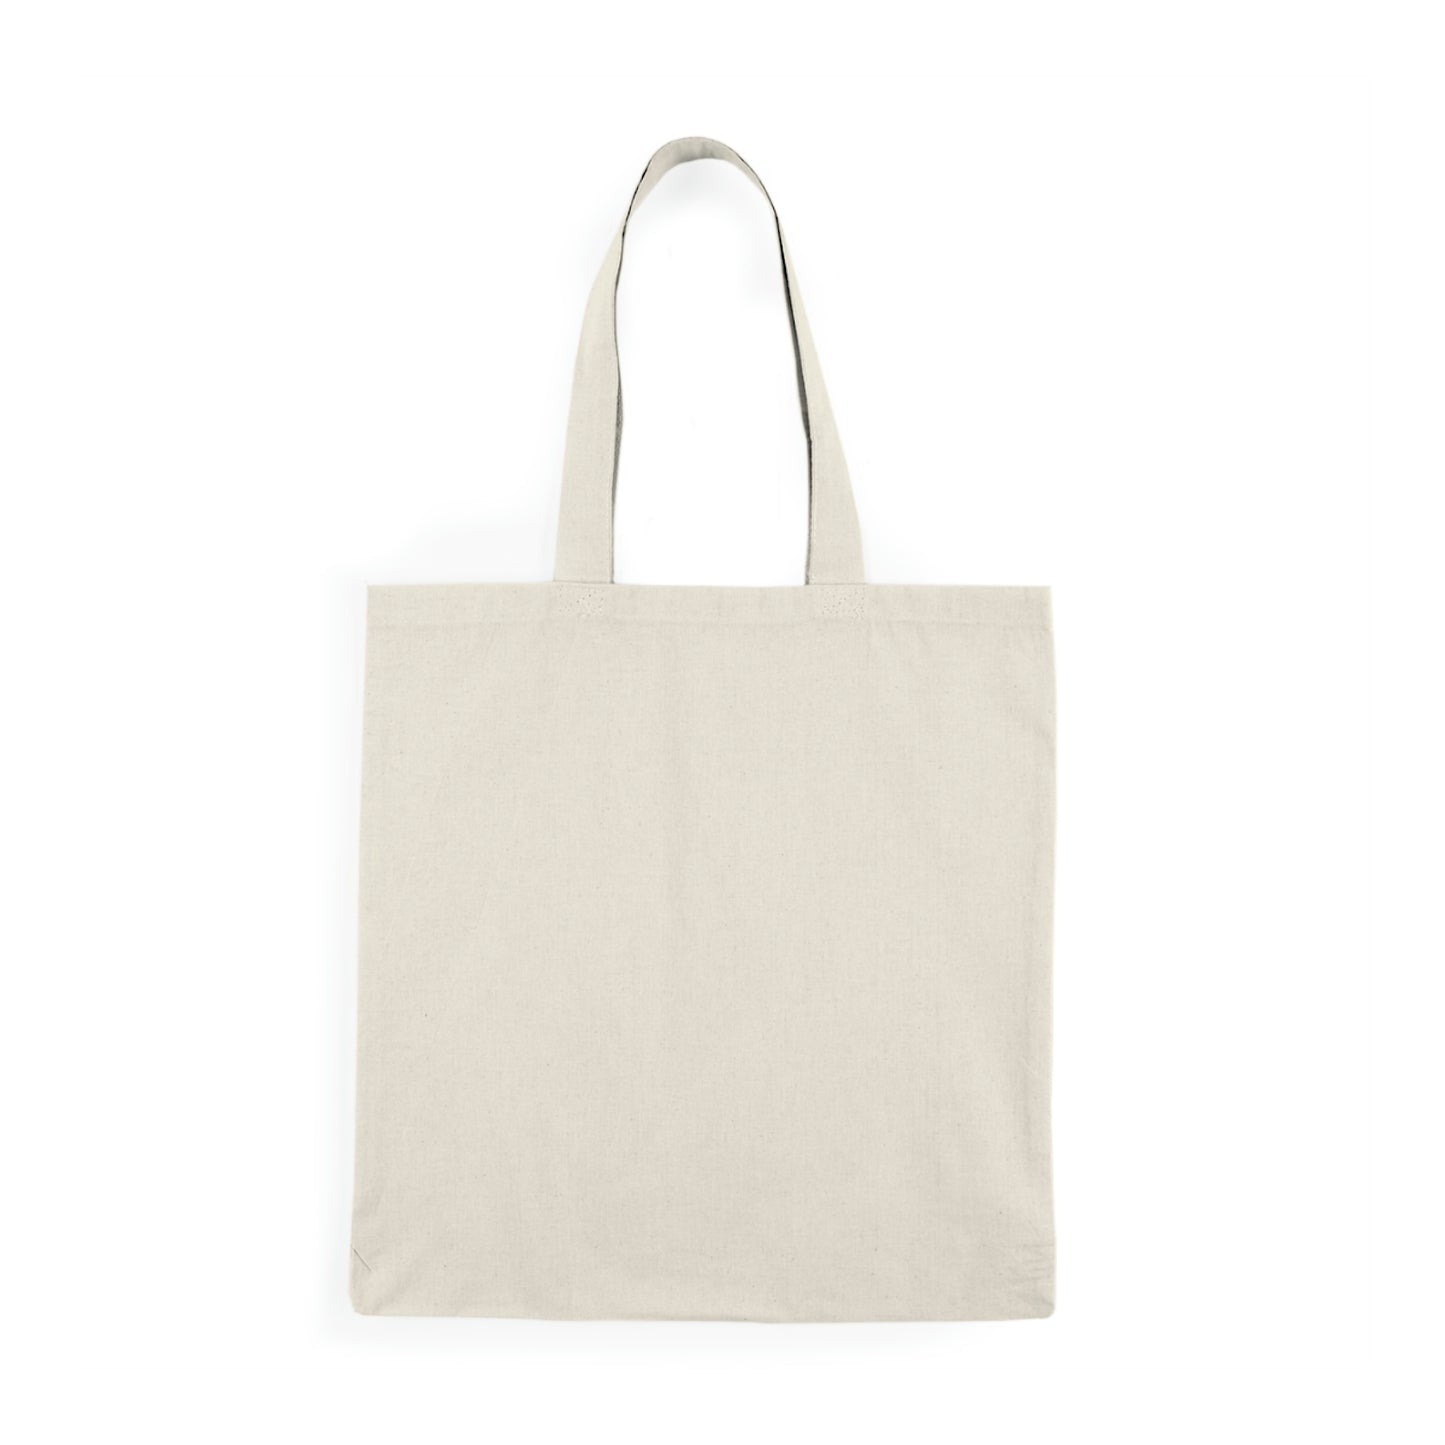 Love's Promise - Natural Tote Bag